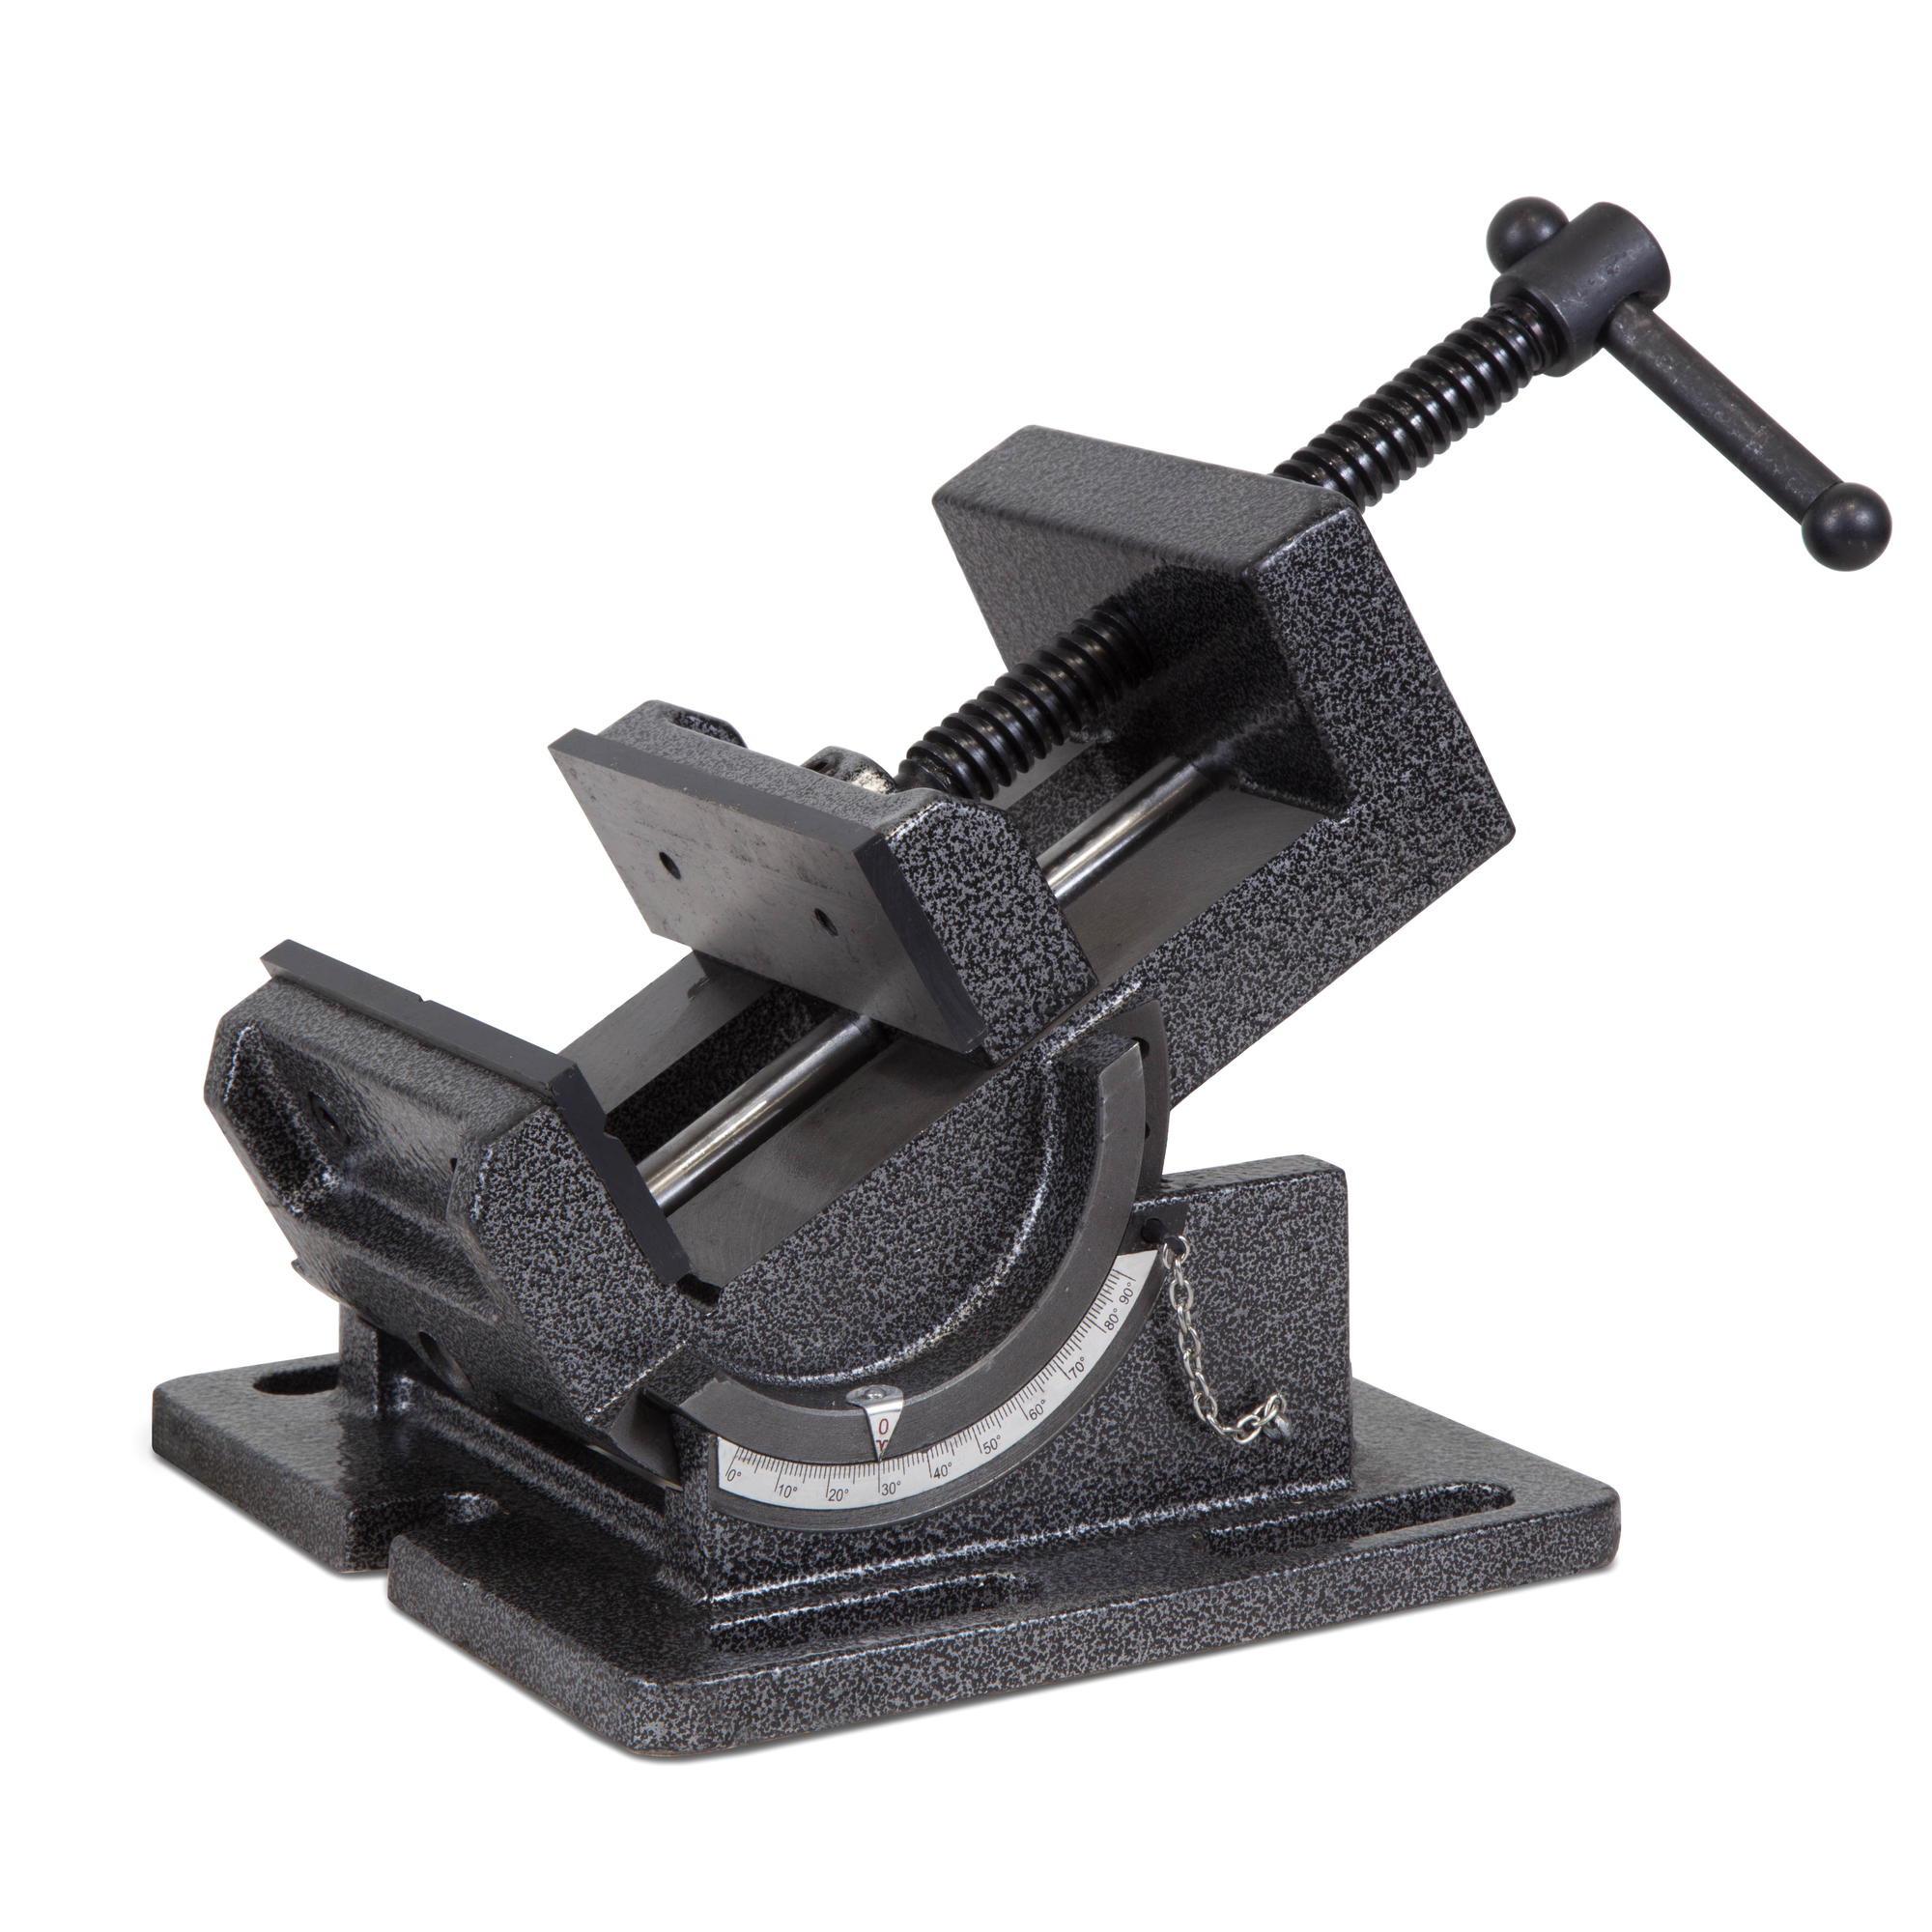 WEN, 4.25Inch Industrial Strength Tilting Angle Vise, Jaw Width 4.25 in, Jaw Capacity 4.25 in, Material Cast Iron, Model TV434